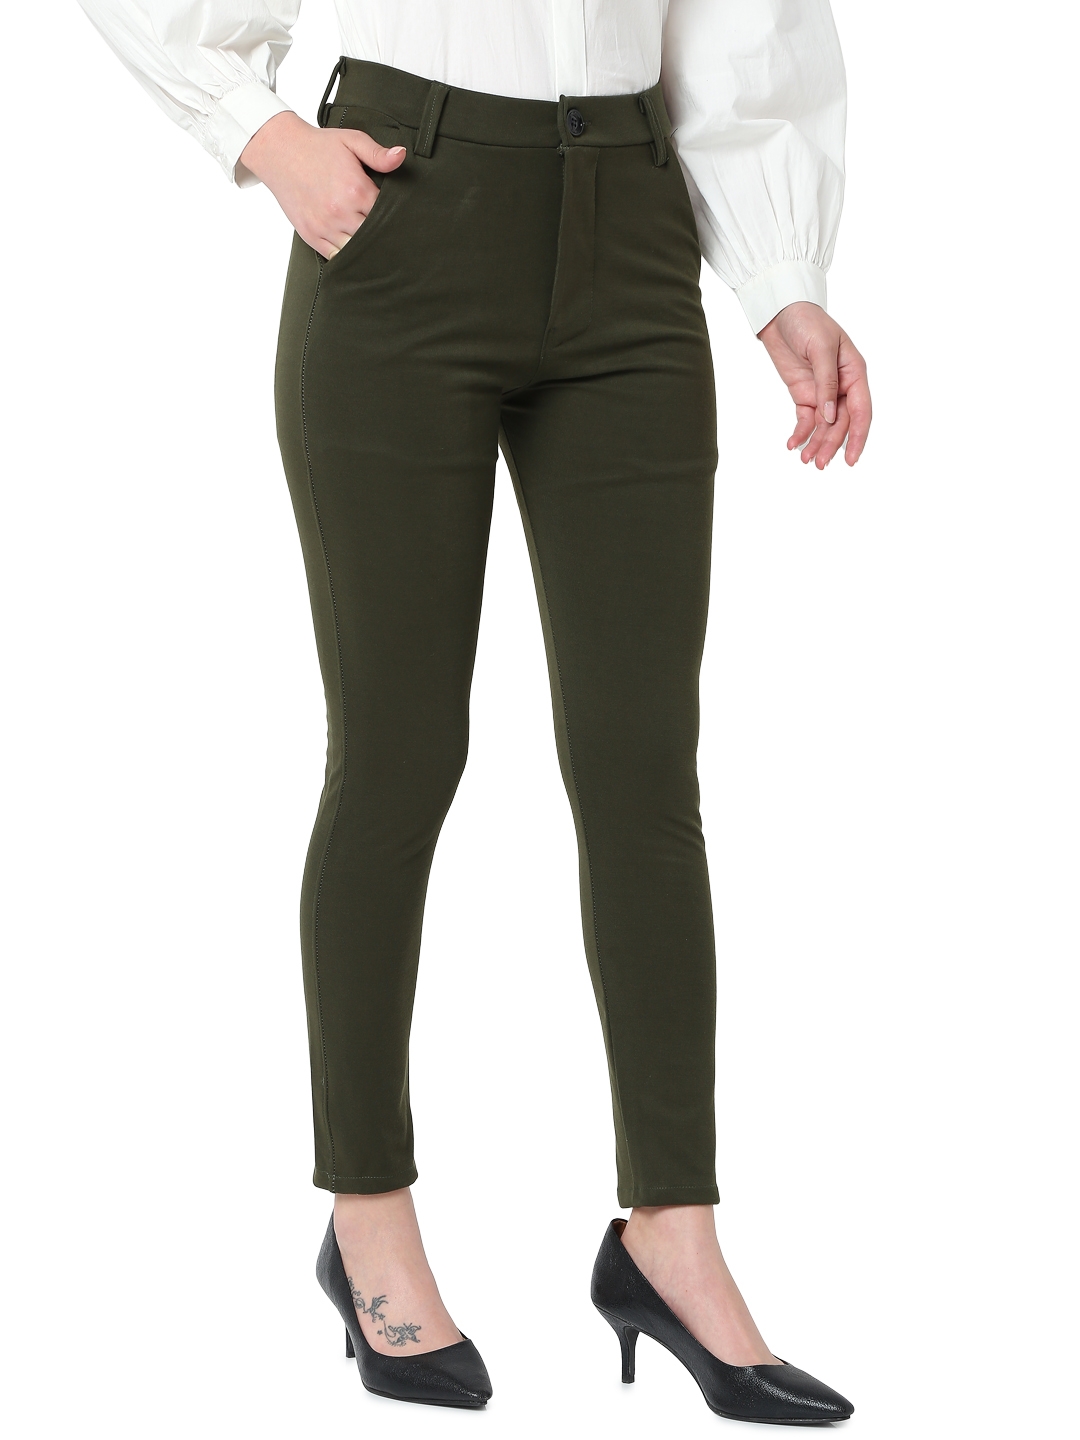 Buy fabcoast Olive Green Stretchable Cotton Lycra Trousers for Women | Lycra  Pant for Women, Women Stretchable Trousers Pants Formal | Lycra Pants for  Women Stretchable (S) at Amazon.in